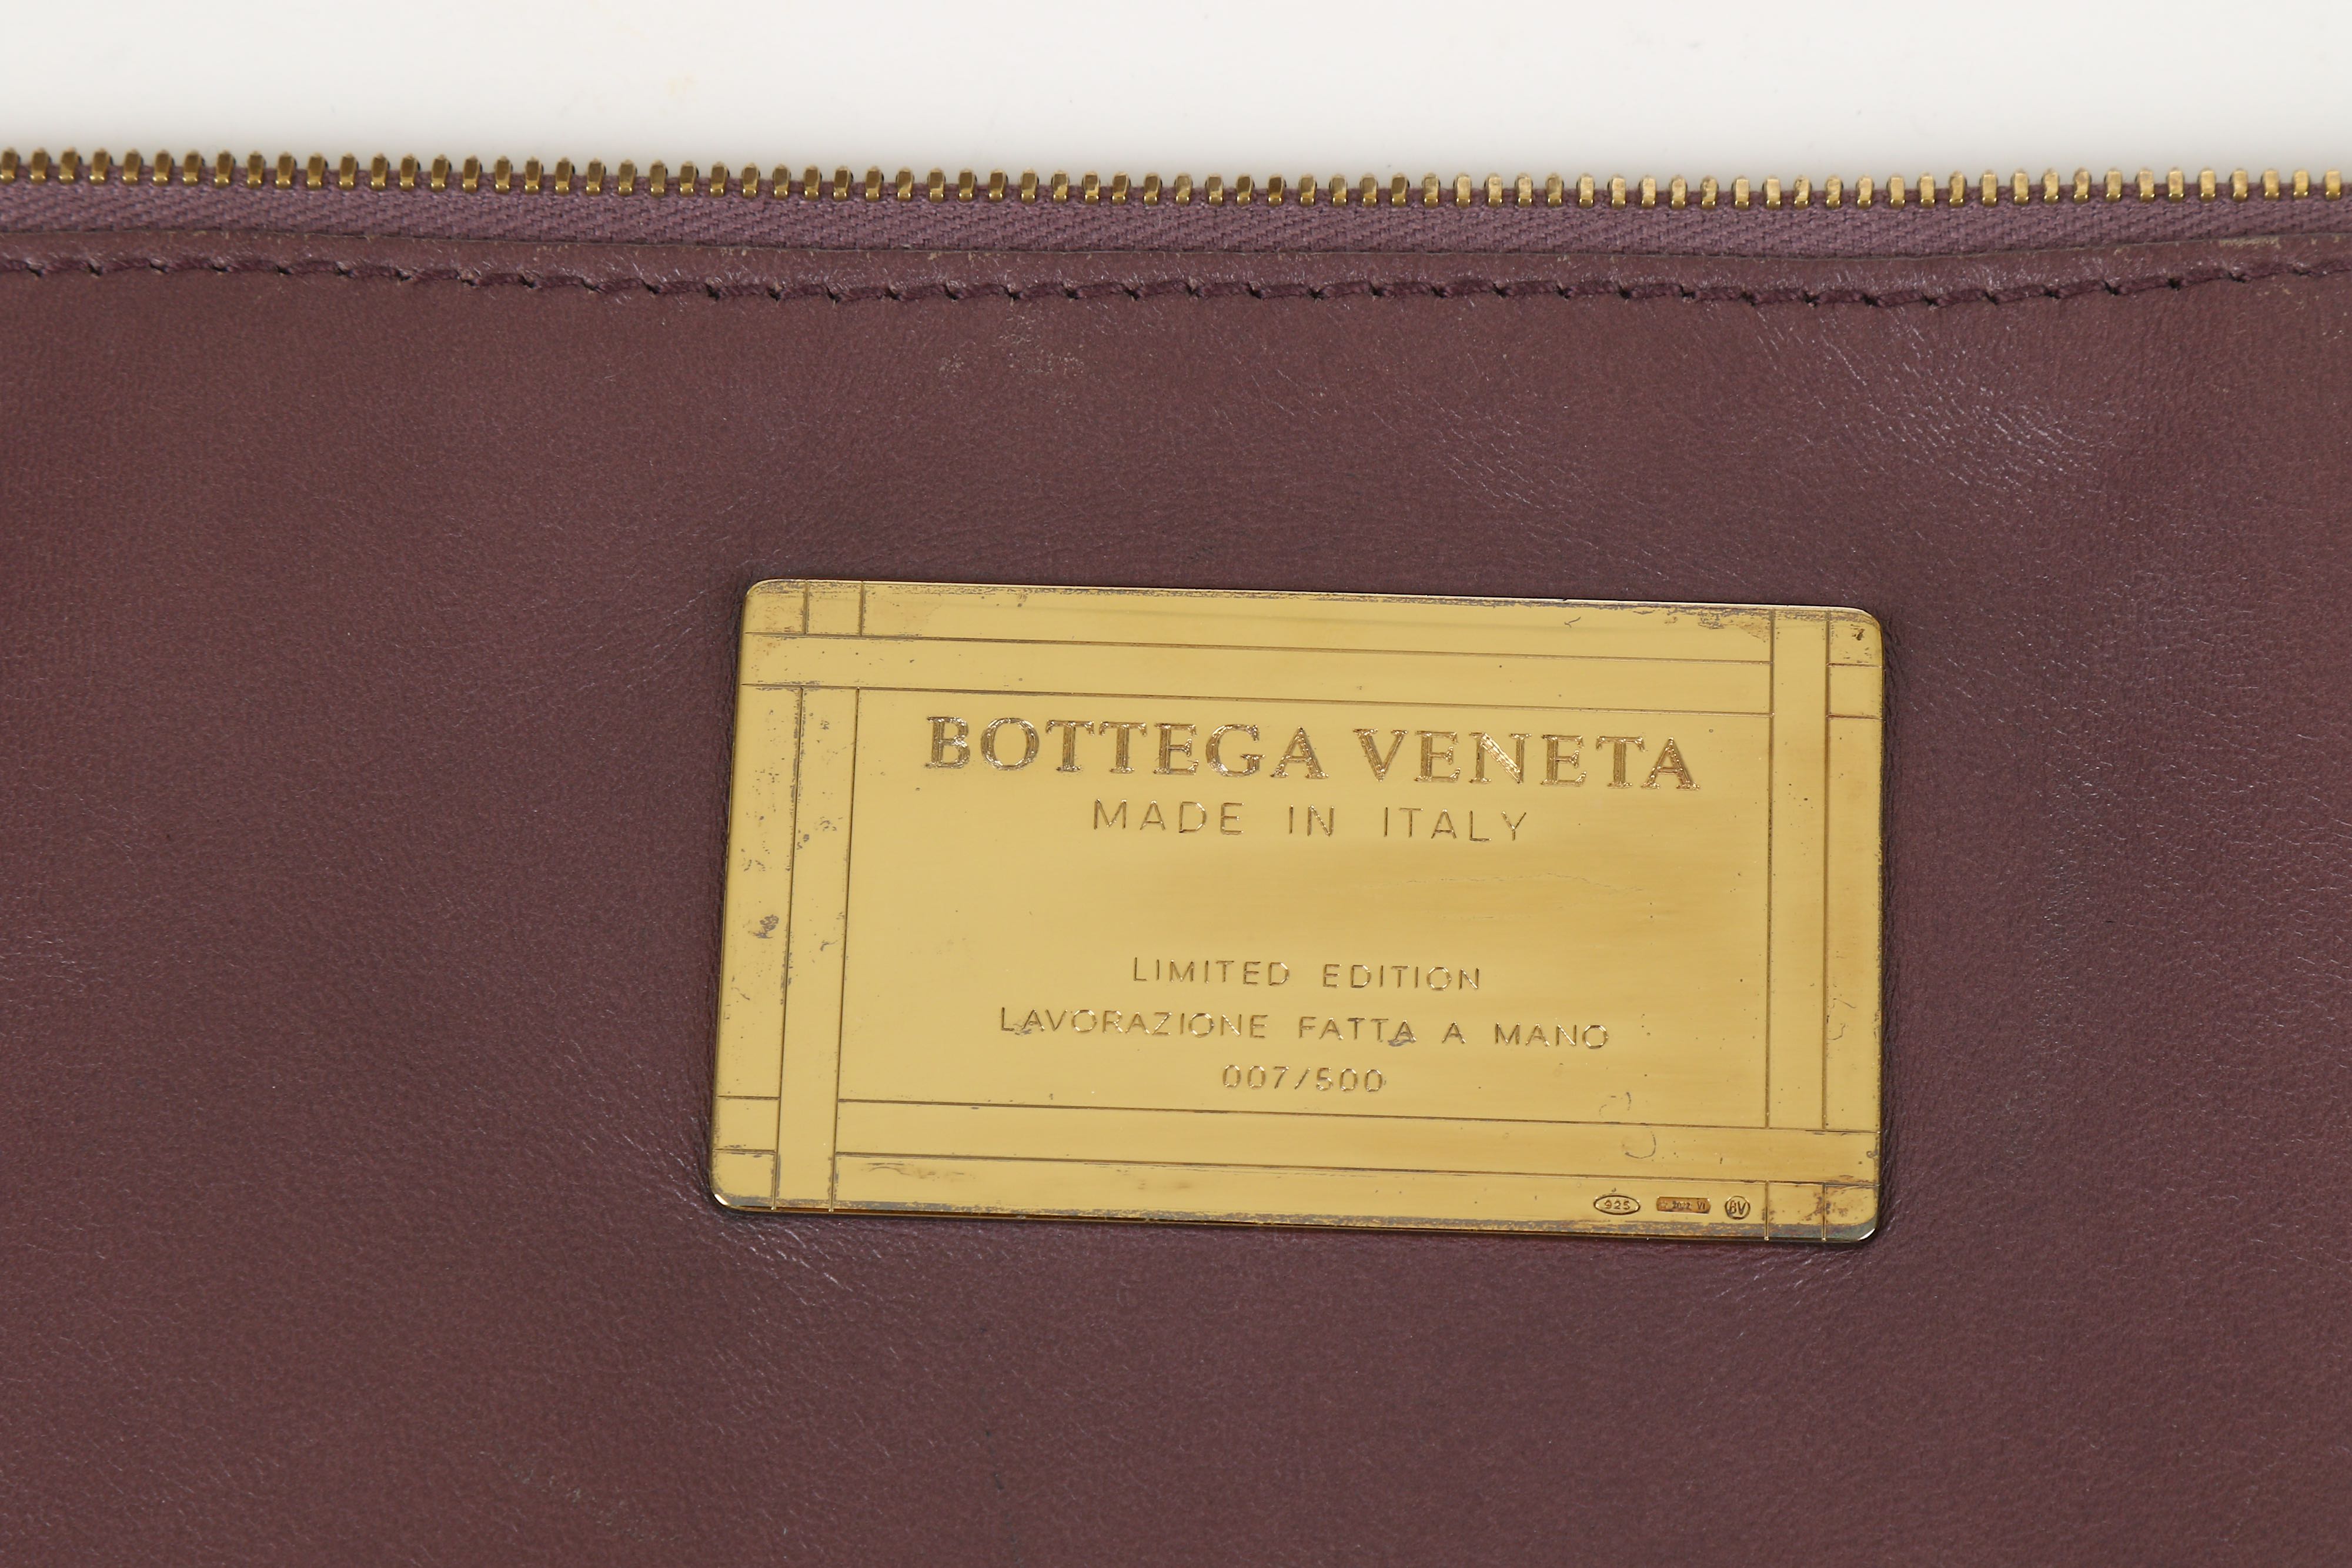 Bottega Veneta and Gaetano Pesce team up for an installation and limited  edition bags in Milan – Rain